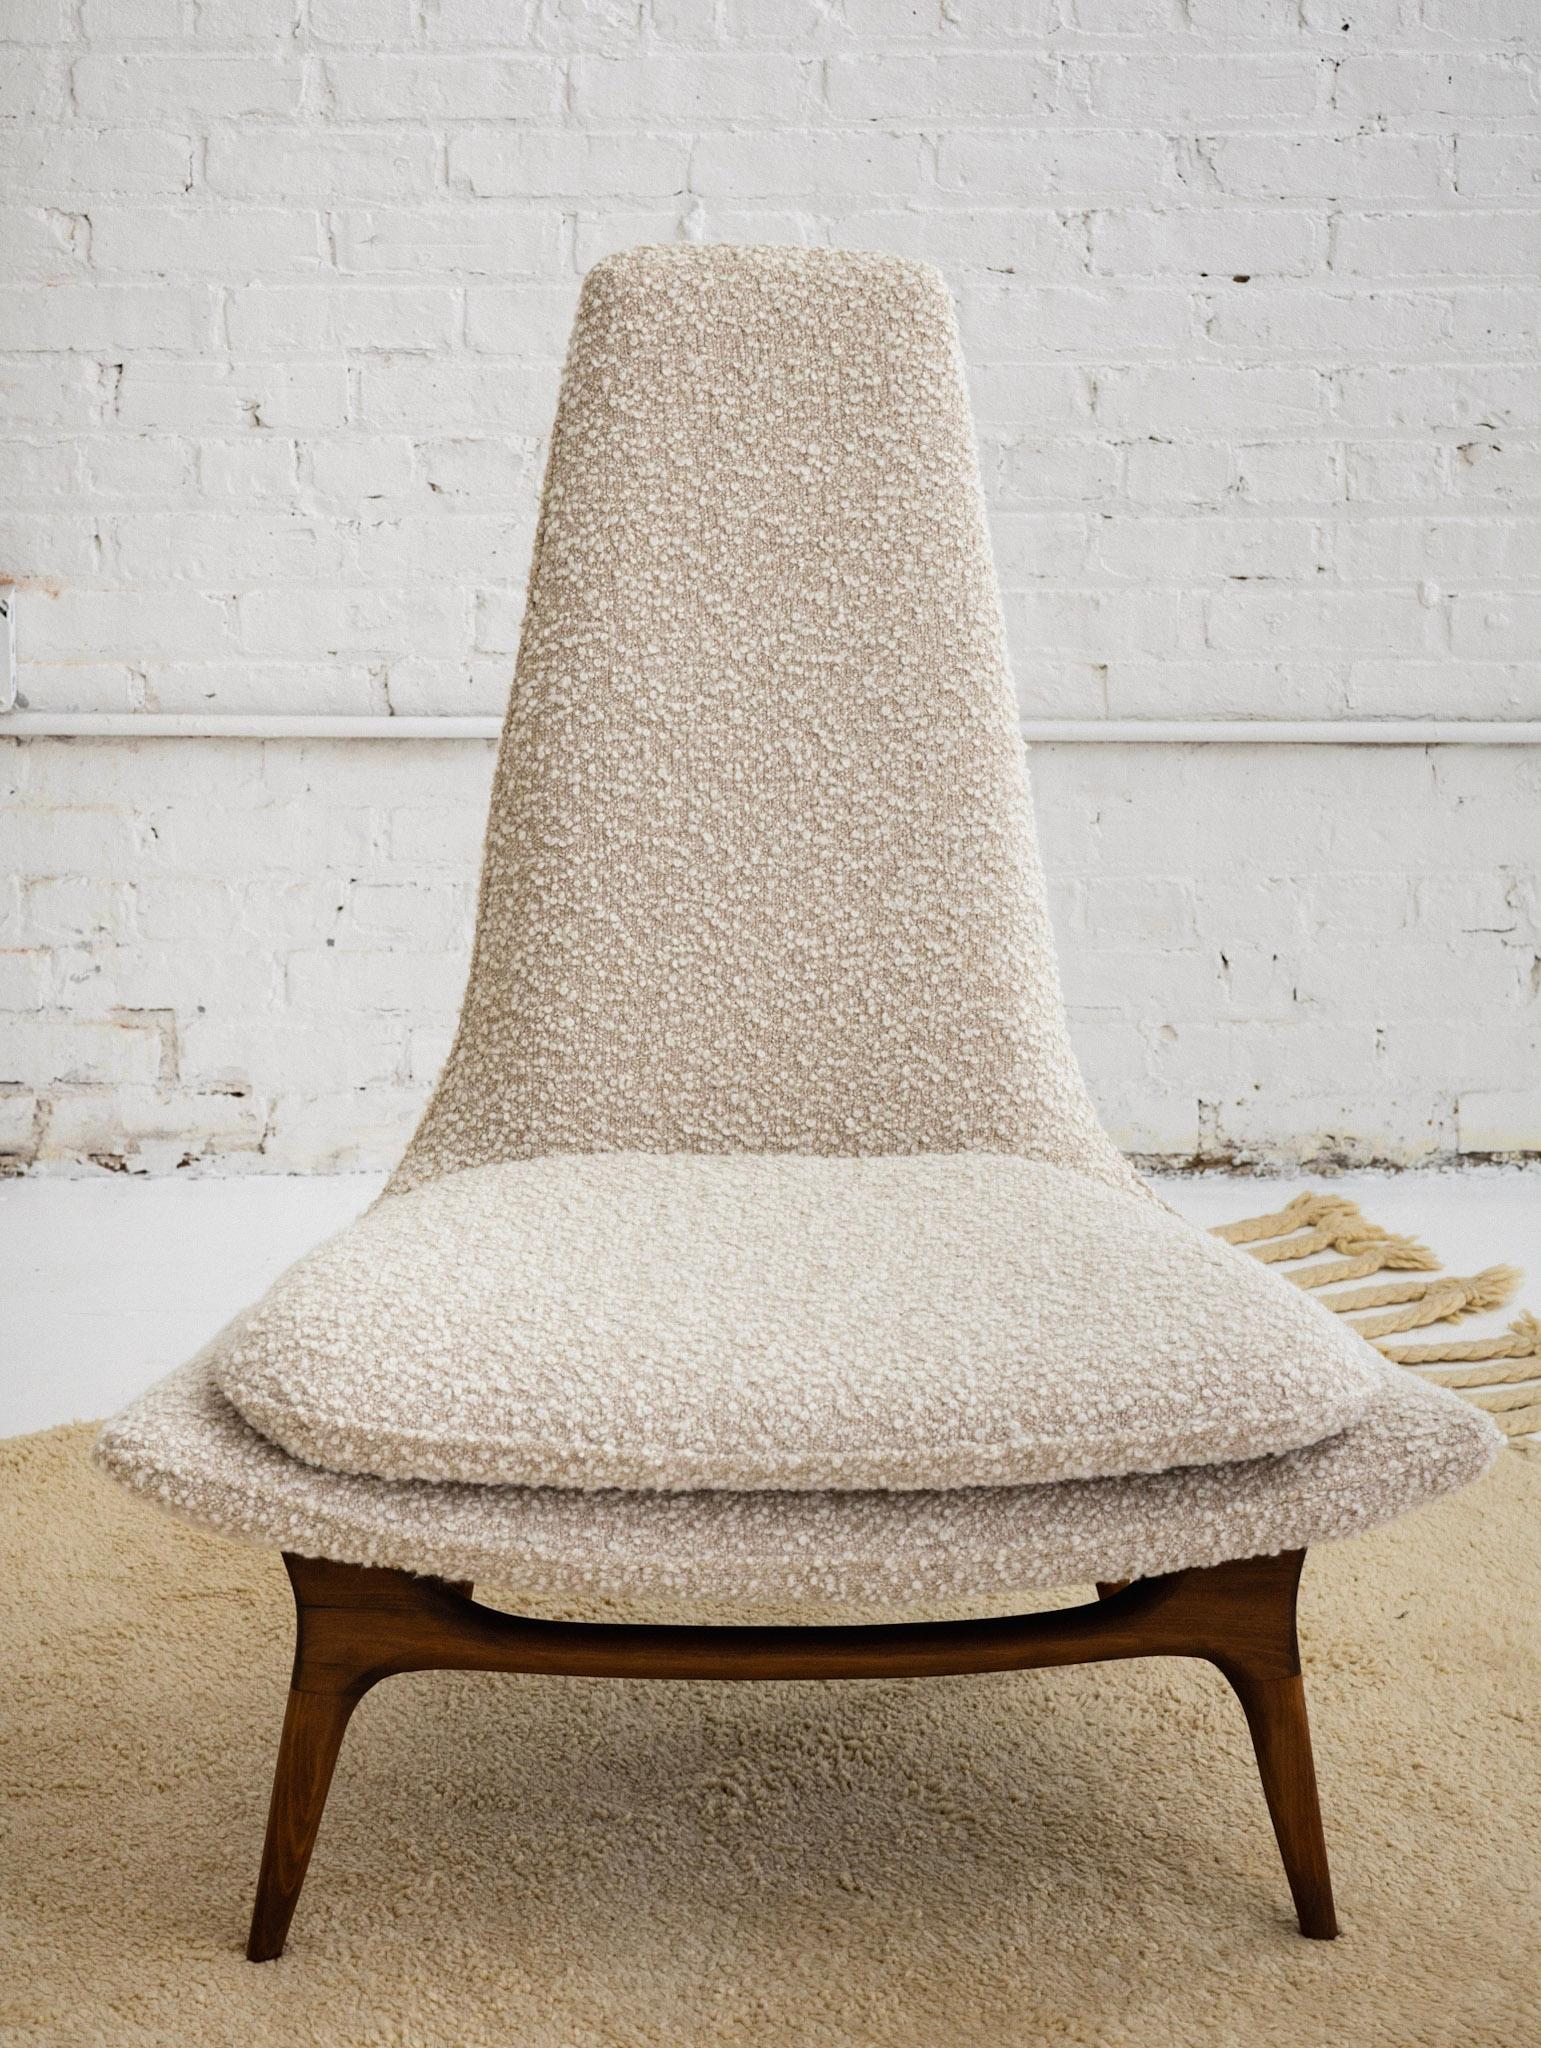 A mid century slipper lounge chair attributed to Karpen of California. Handkerchief silhouette. Newly restored walnut feet. New cream and beige high quality wool bouclé upholstery.